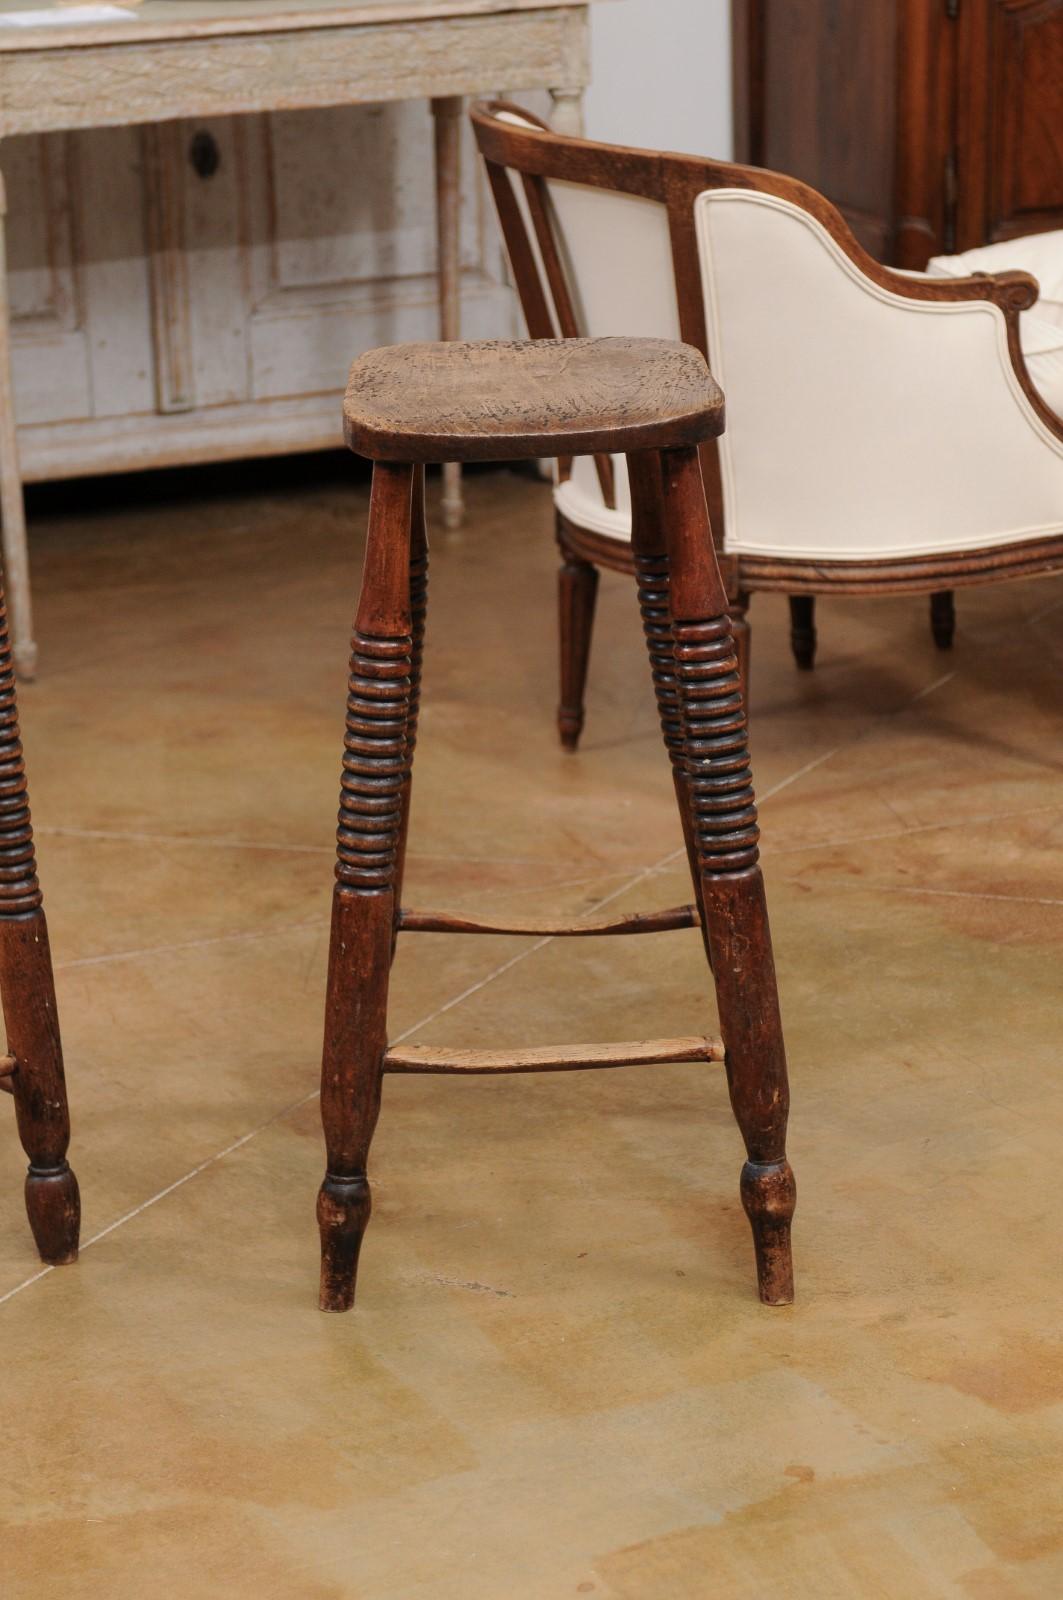 Rustic Pair of 1870s French Wooden Bar Stools with Spool Legs and Weathered Patina